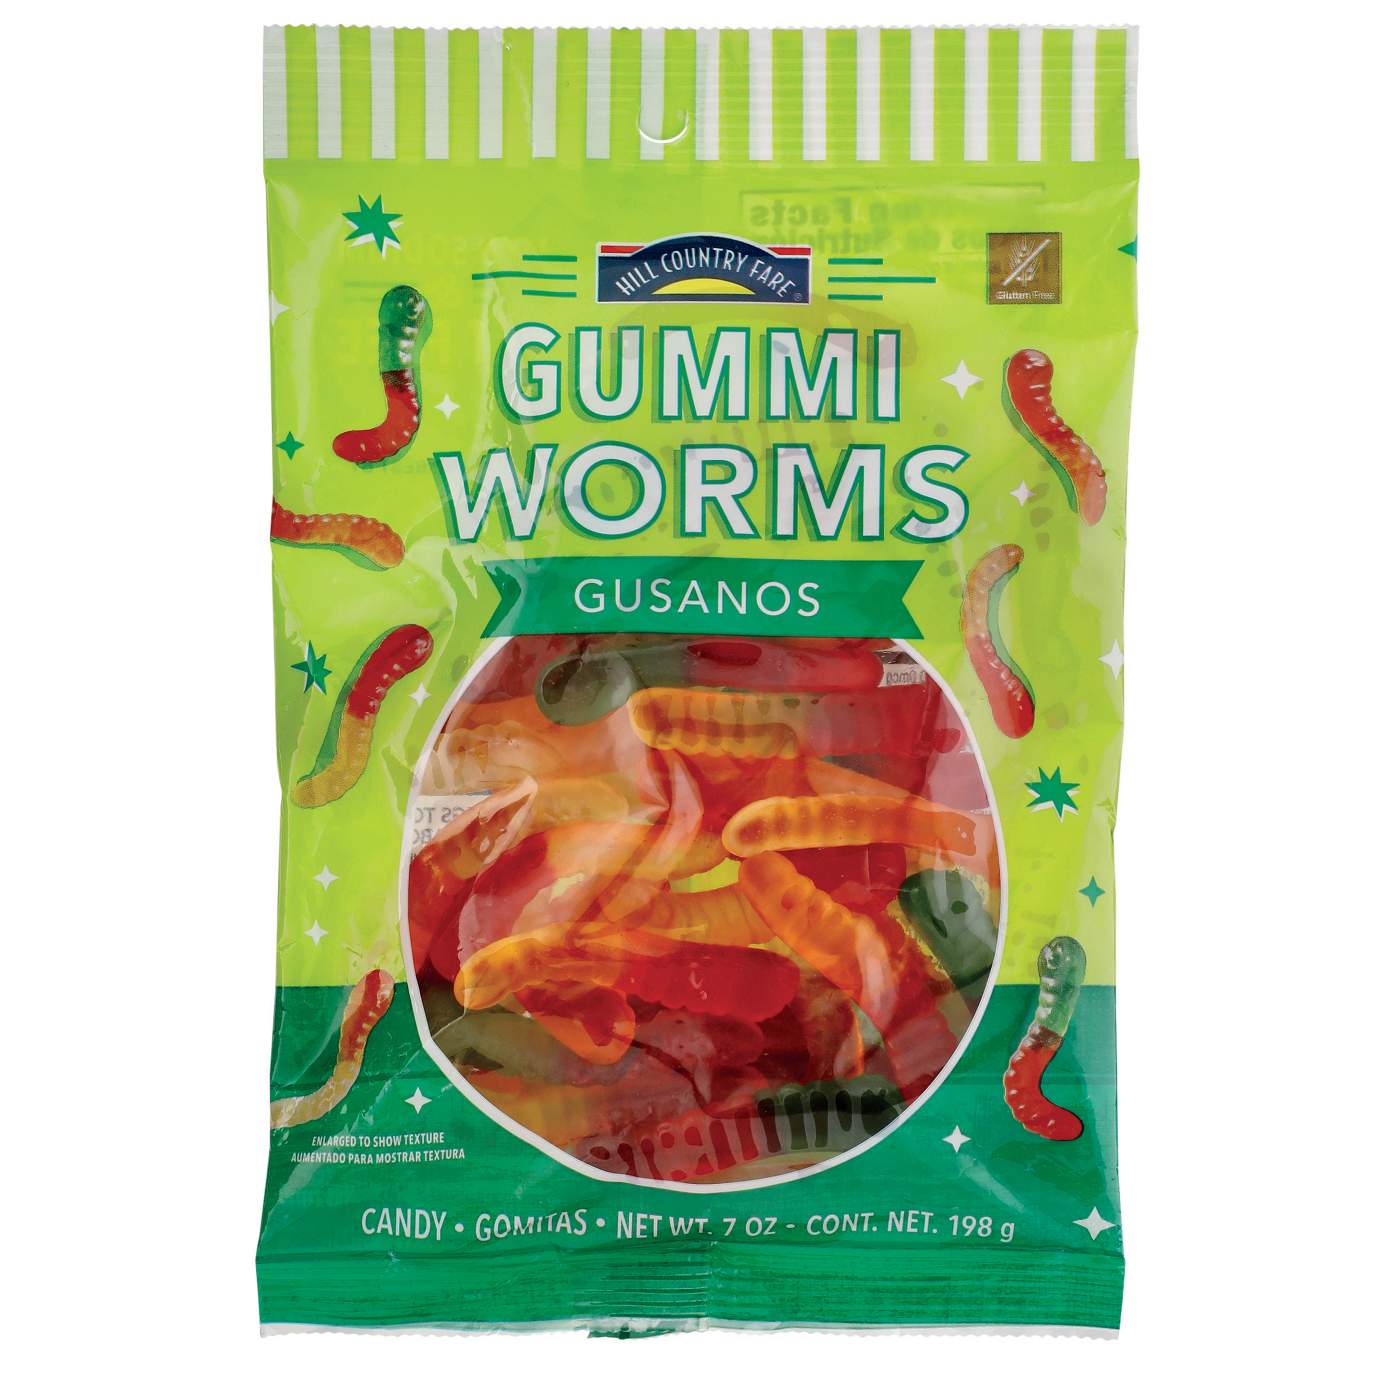 Hill Country Fare Gummi Worms; image 1 of 2